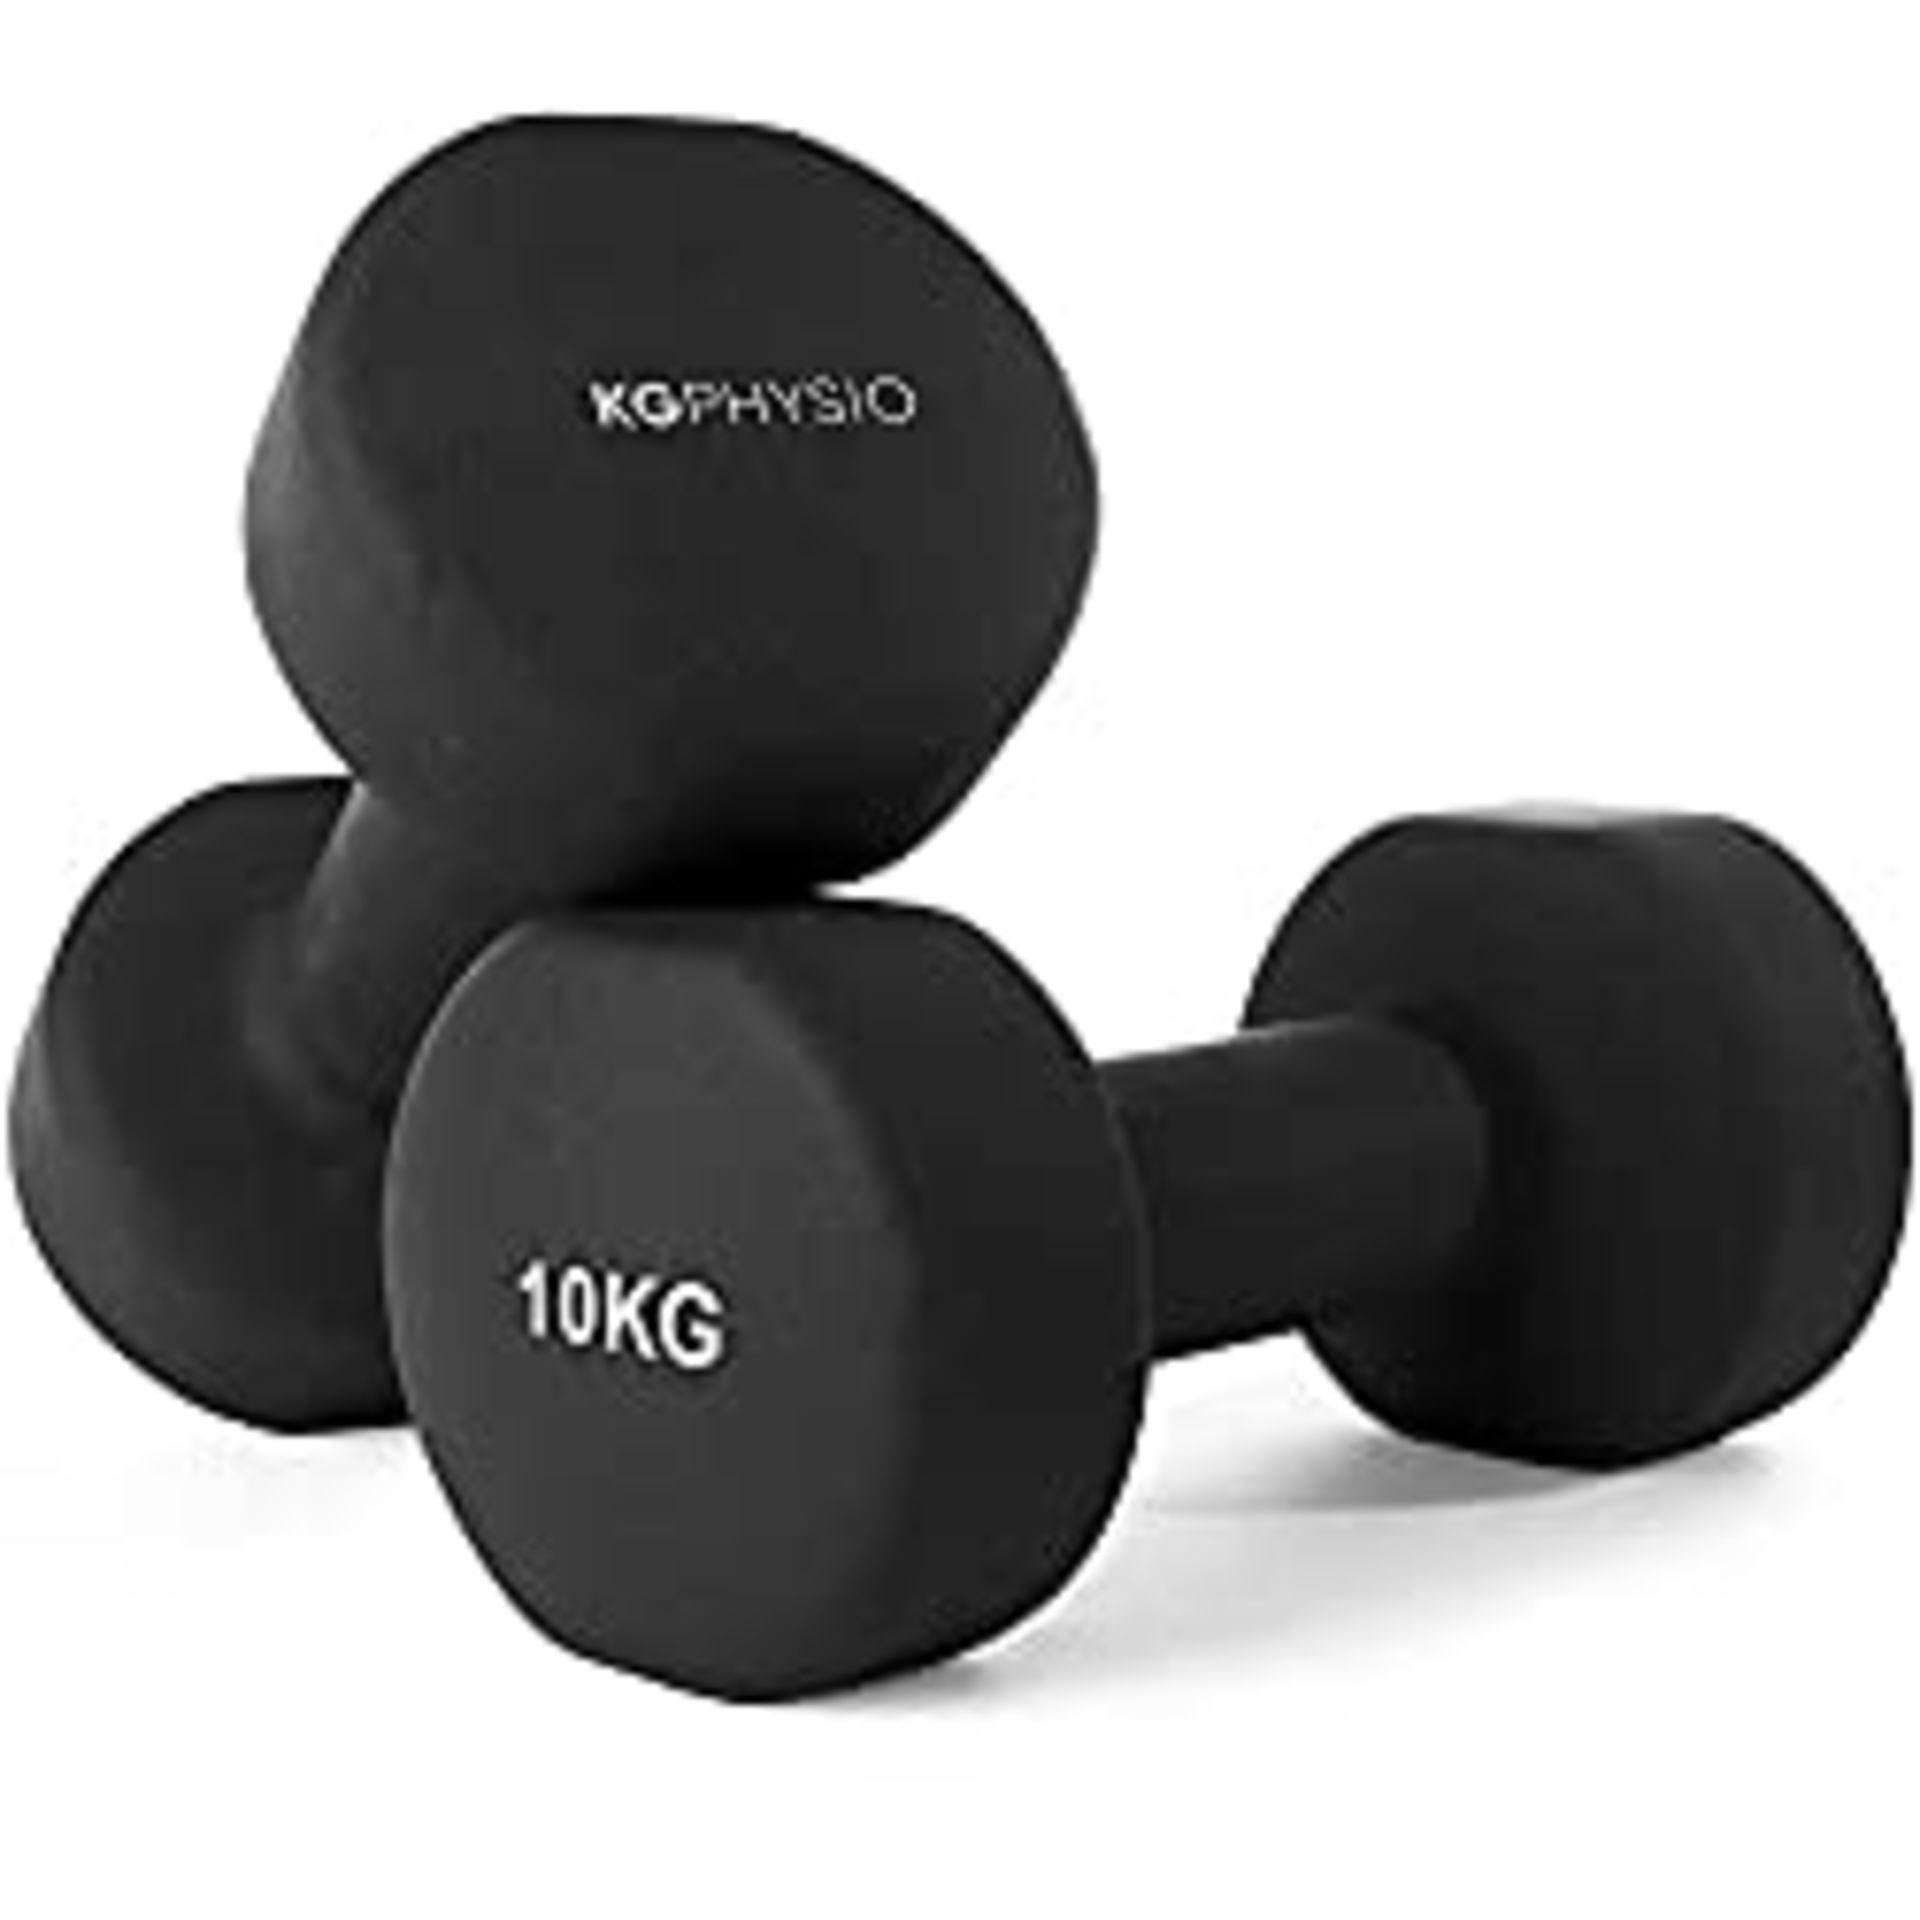 RRP £57.07 KG Physio Weights Dumbbells Set - Neoprene-Coated Dumbbells Weights Set